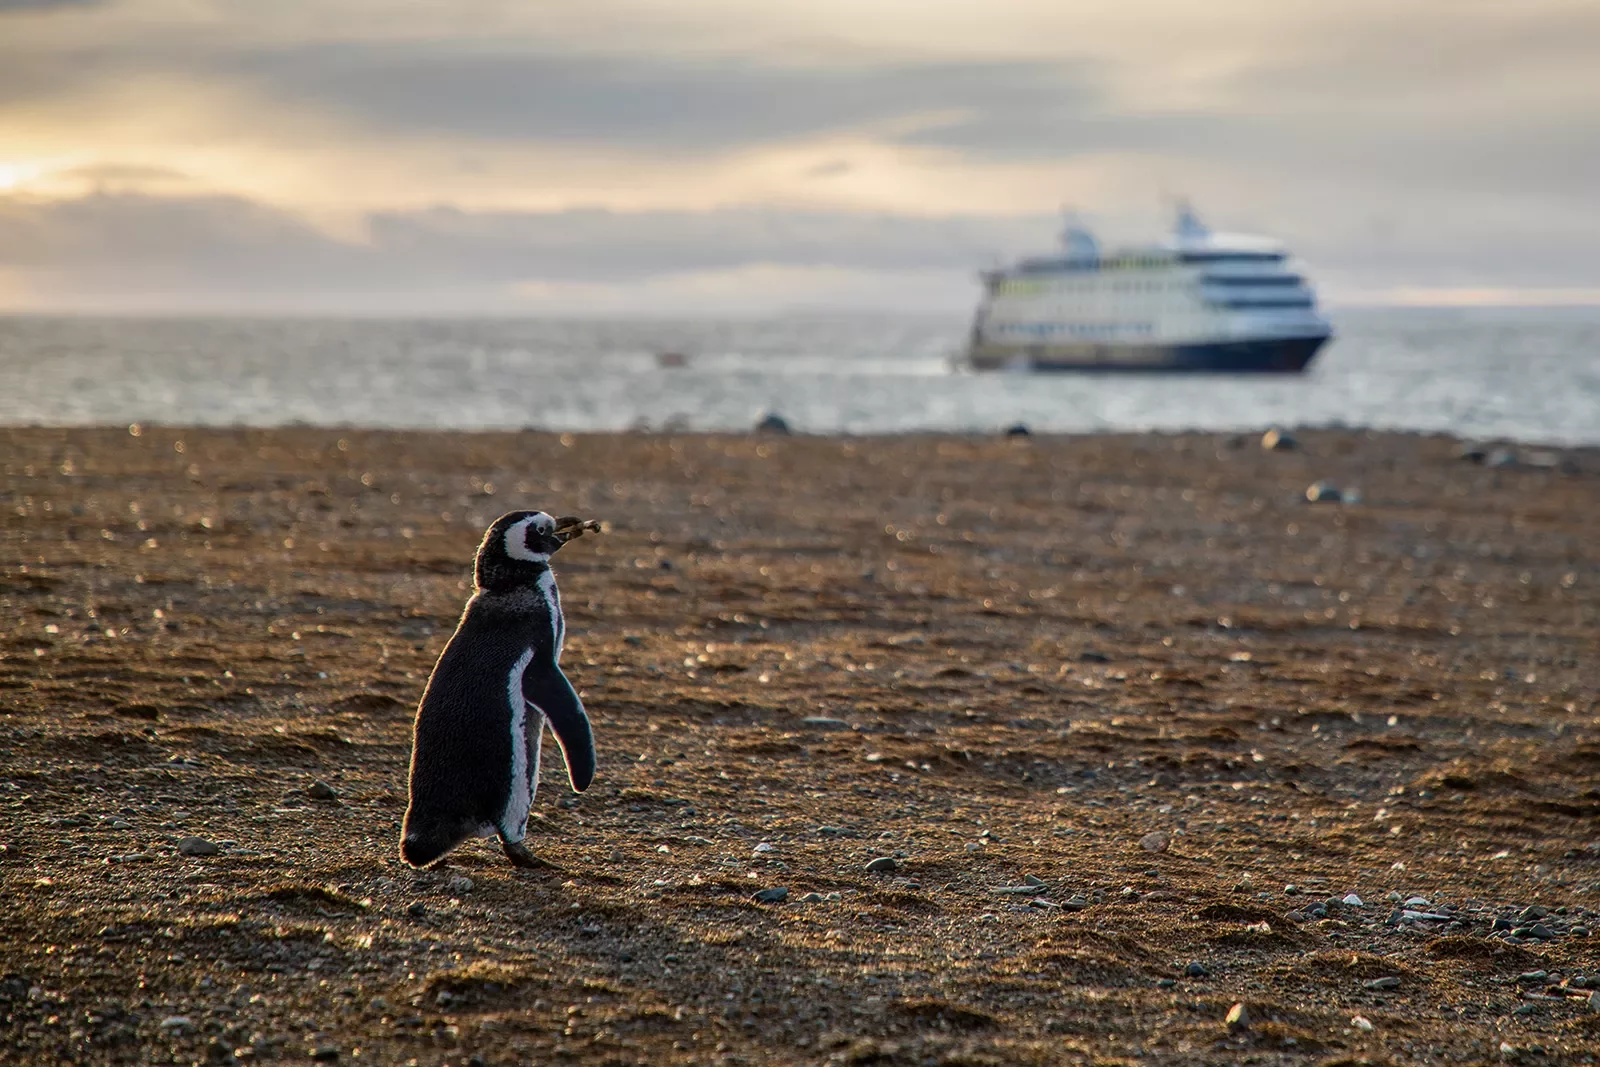 Shot of beach, single penguin, large cruise ship in distance.